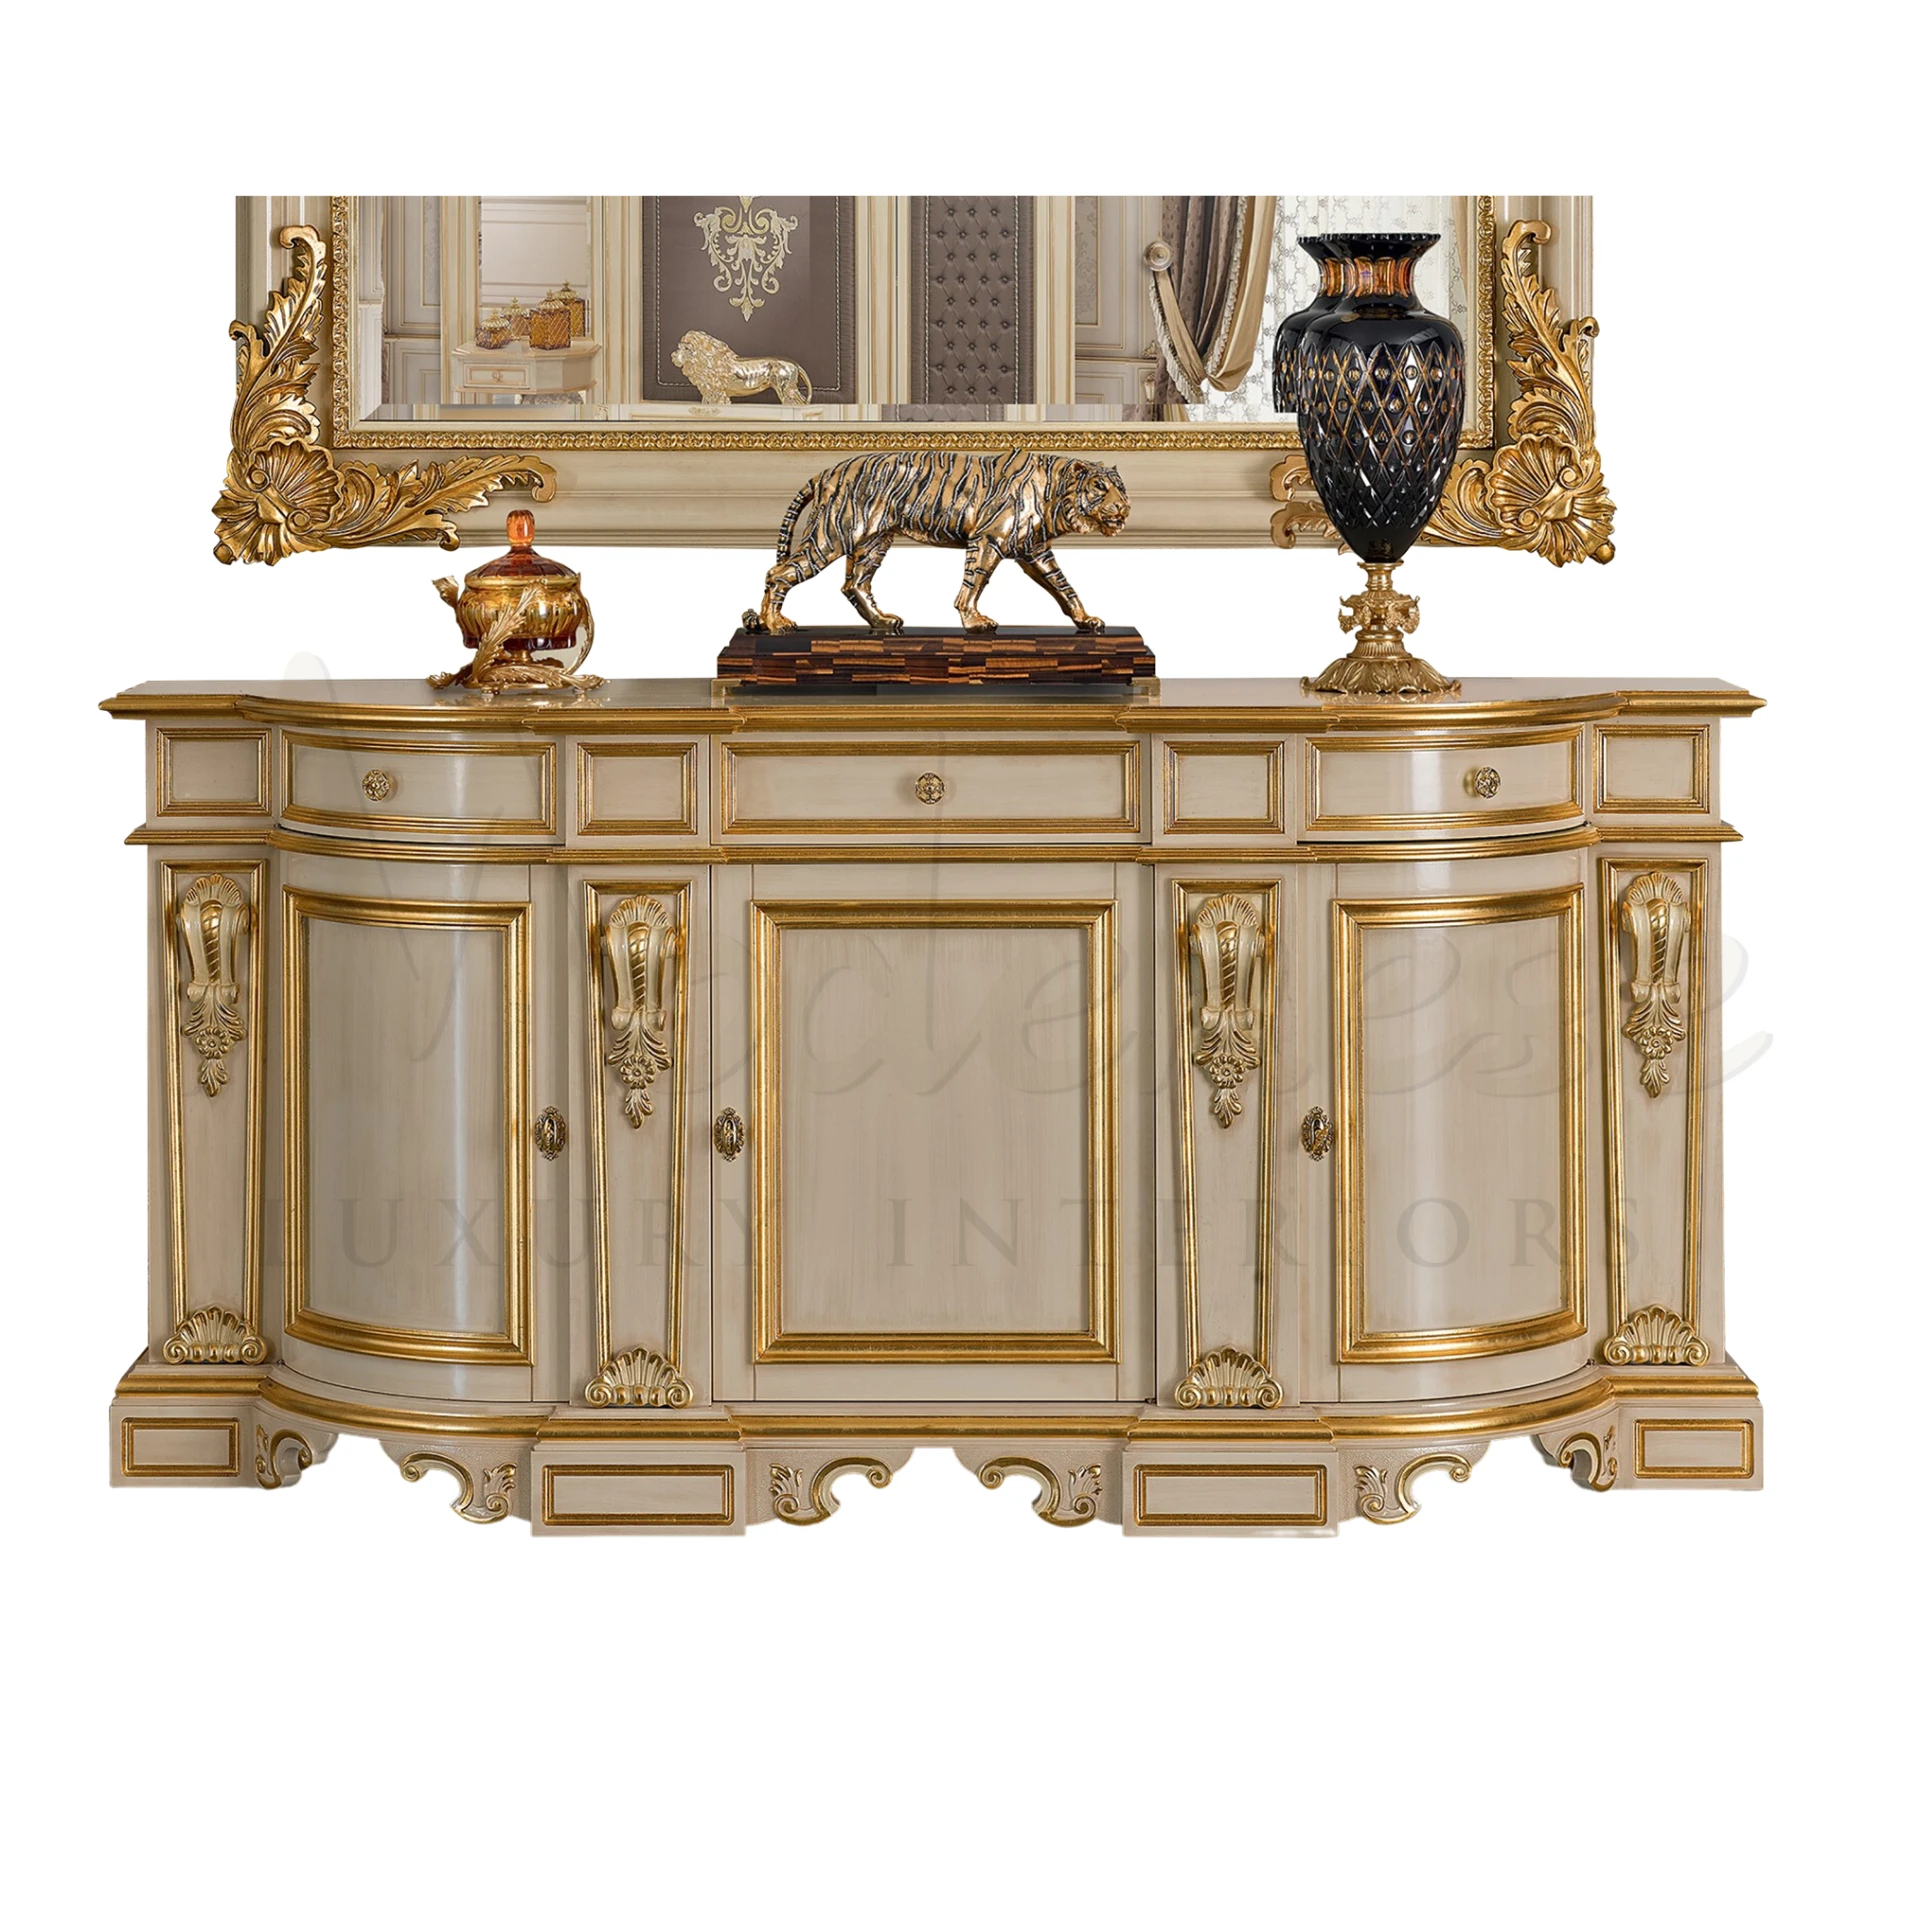 Lovely Italian Classic Wood Sideboard with elegant carvings and golden details.